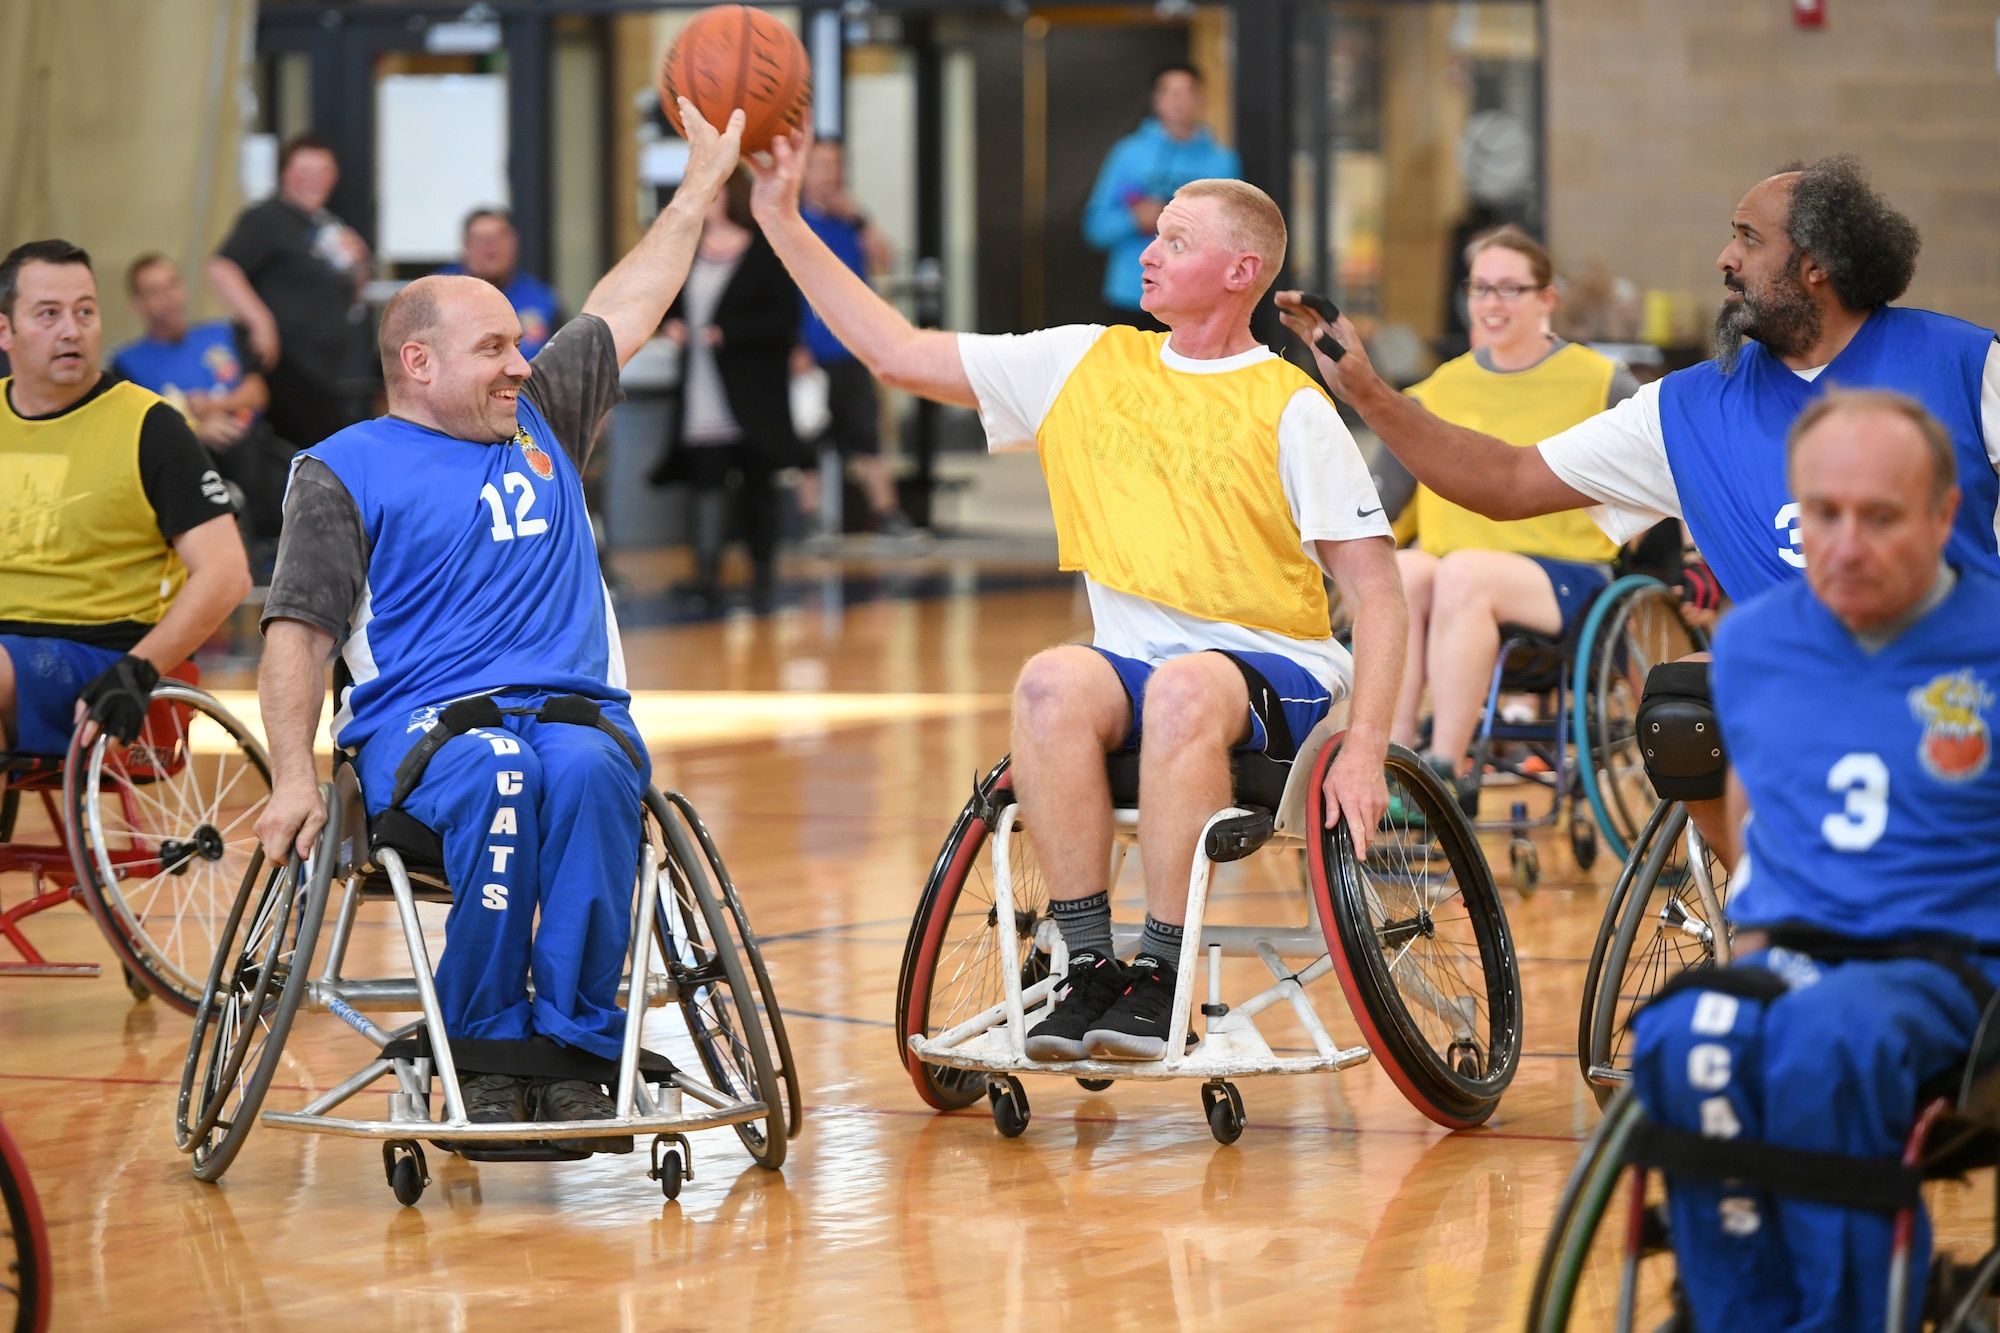 Colonel Jon Eberlan, 75th Air Base Wing commander, spars for ball possession with a player from the Ogden Wheelin' Wildcats during a wheelchair basketball game Oct. 9, 2019 at Hill Air Force Base, Utah. Leaders from Hill's units faced off against the Wheelin' Wildcats, a semi-professional wheelchair basketball team, to celebrate National Disability Employment Awareness Month. (U.S. Air Force photo by Cynthia Griggs)